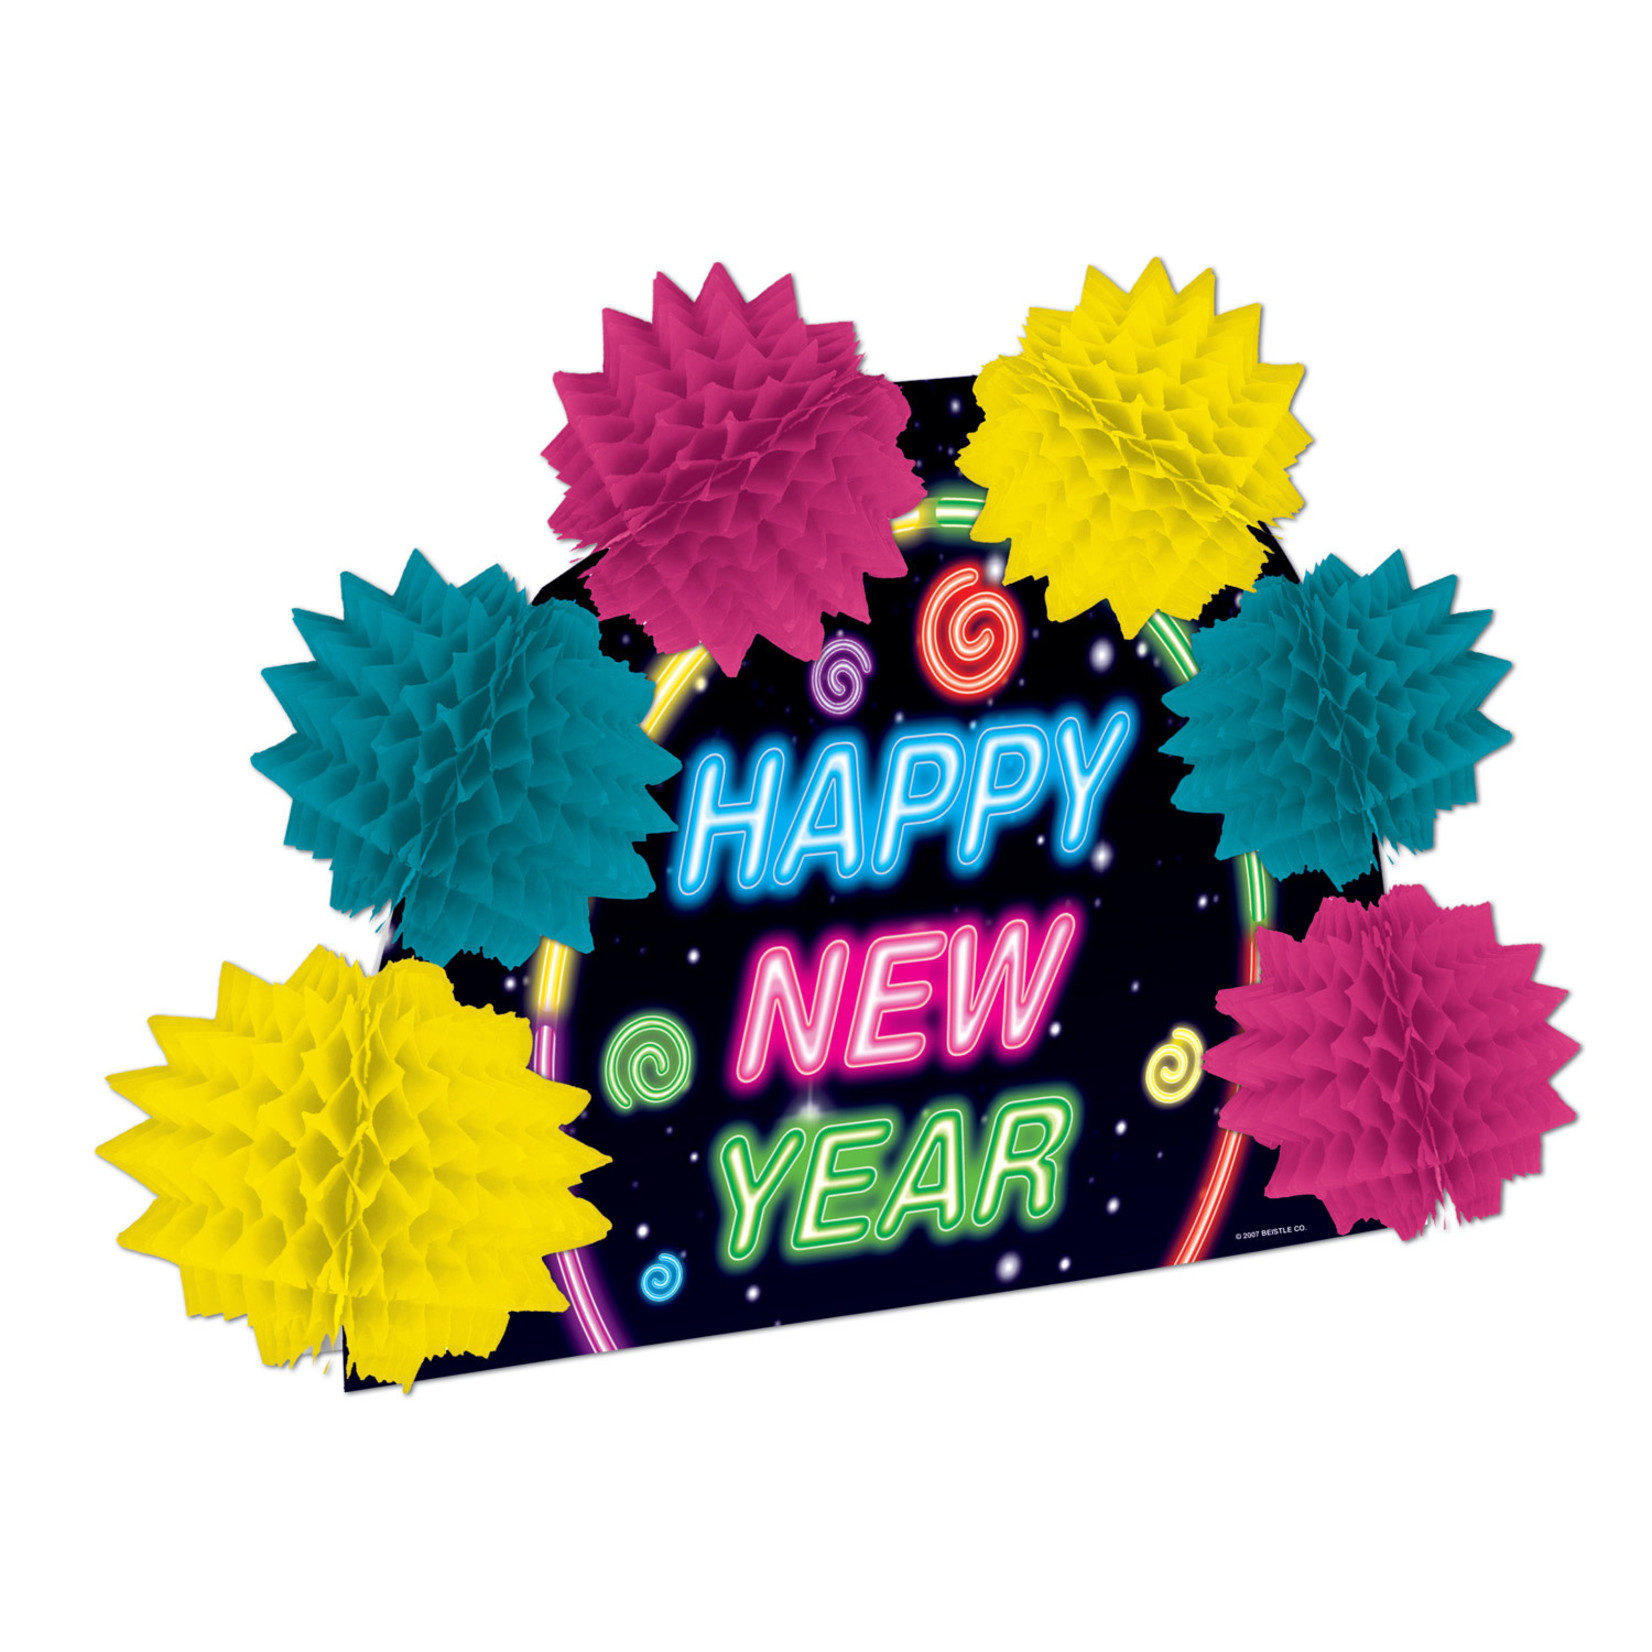 Beistle Multi-Color Happy New Year 3-D Centerpiece - 10" x 6"